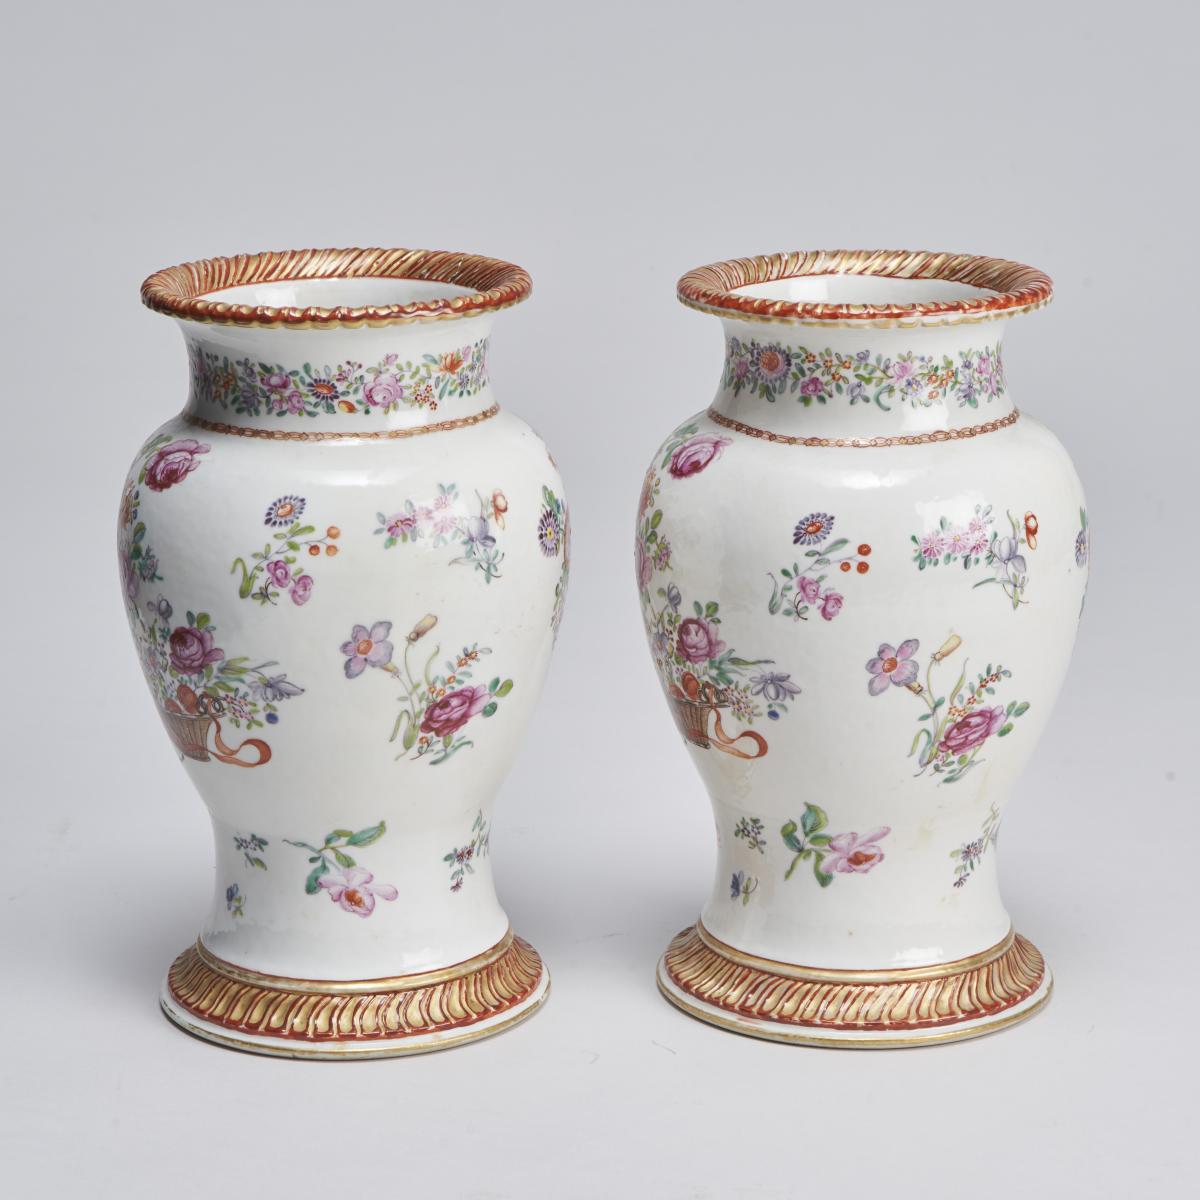 An elegant pair of 18th Century Chinese export Famille Rose vases